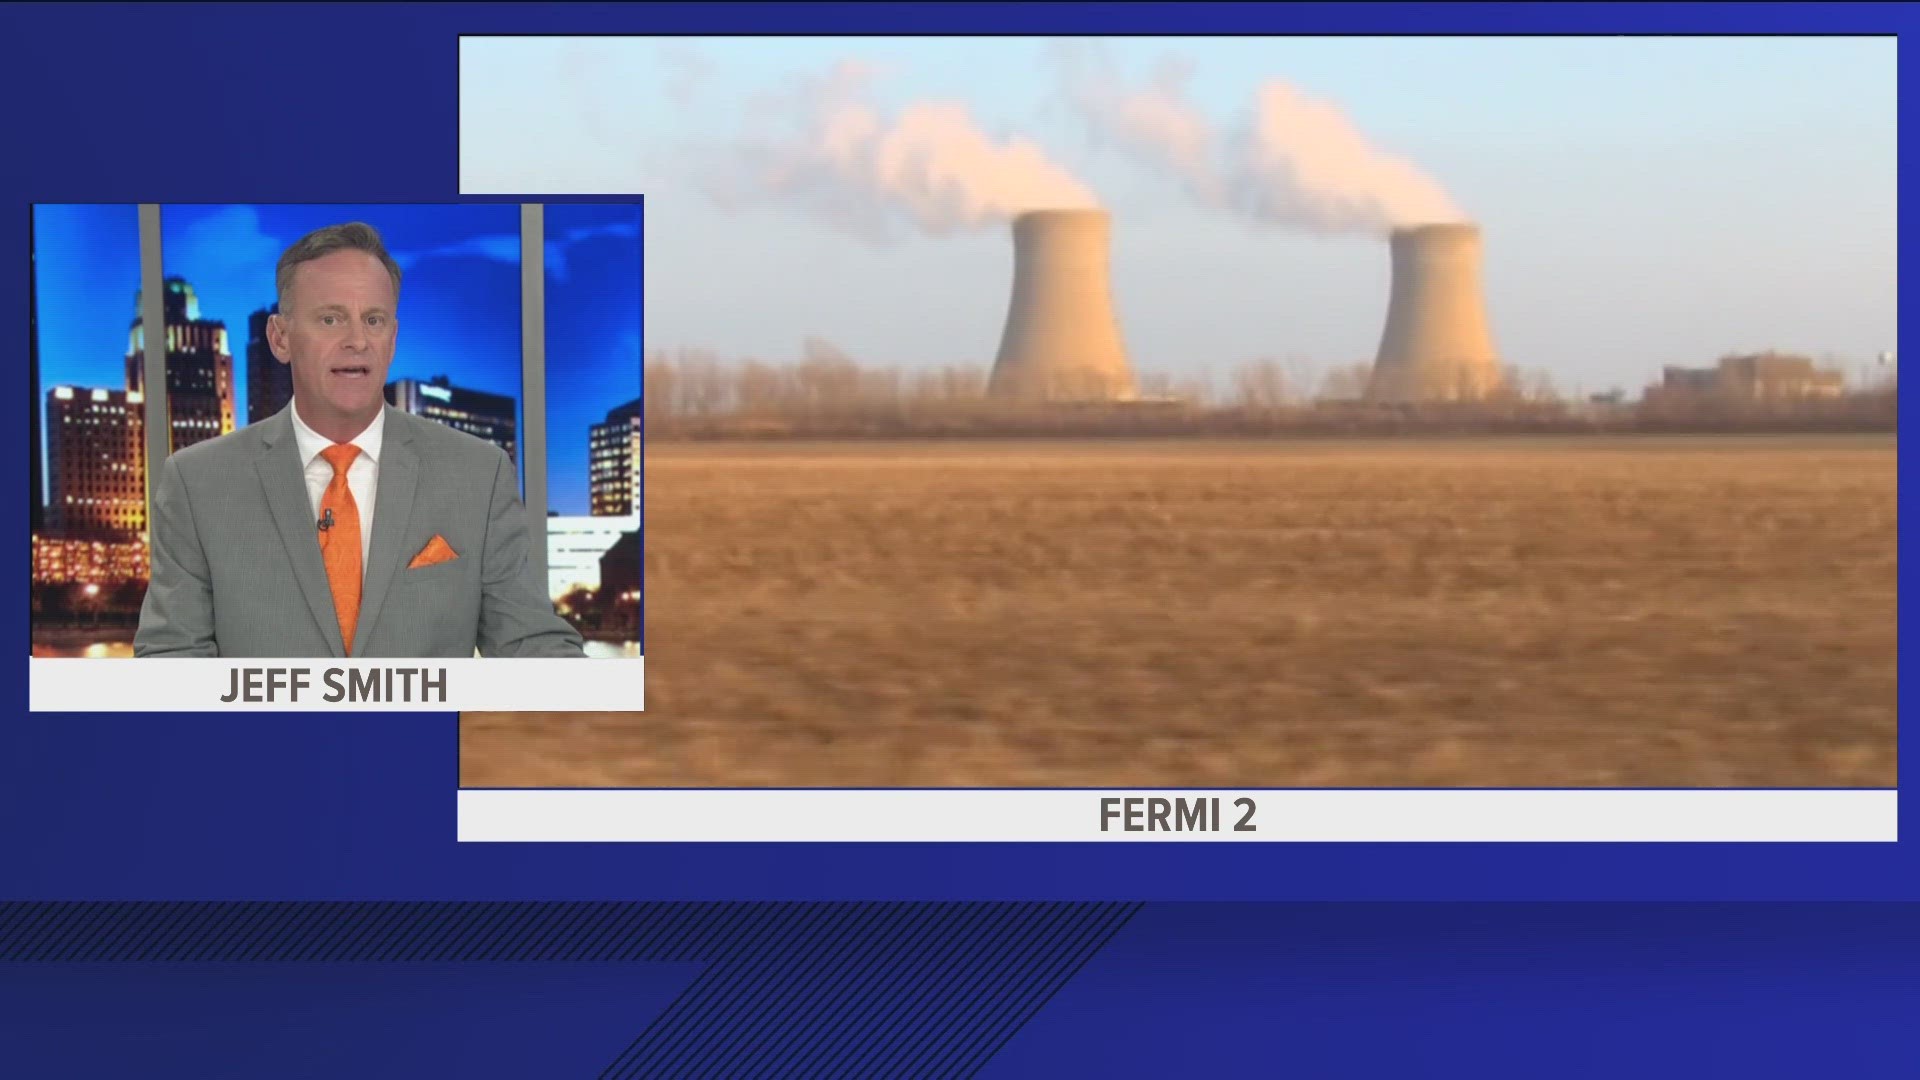 The situation at Fermi 2 is not an emergency and there is no threat to the public, according to Nuclear Regulatory Commission.